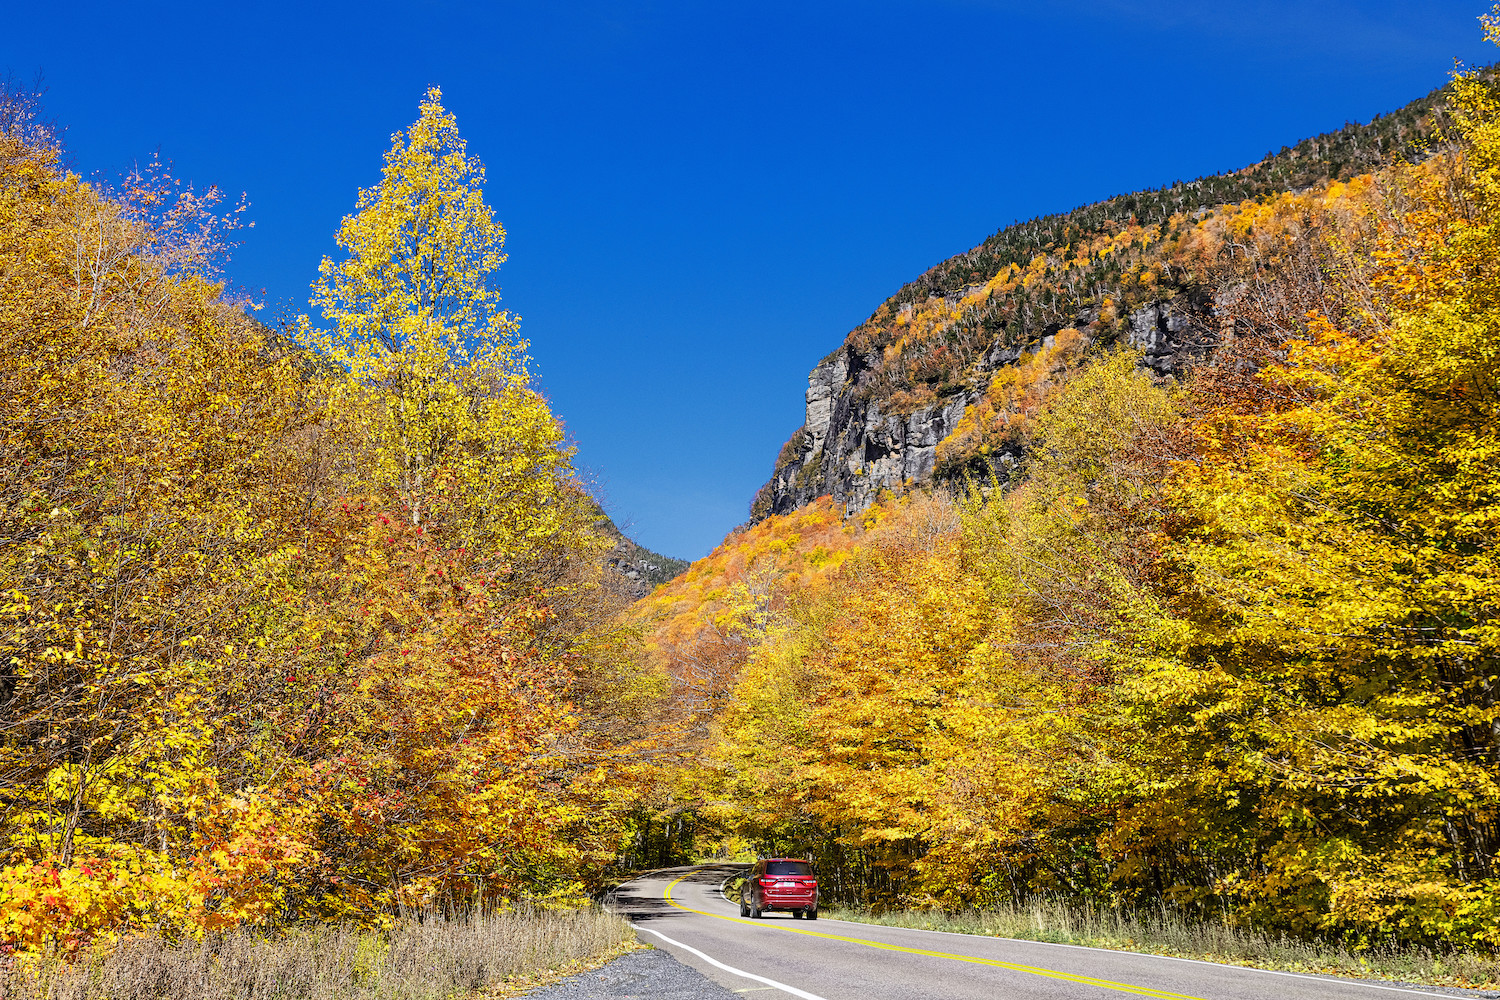 Scenic autumn drive through Smugglers Notch, one of the best scenic drives for leaf-peeping in the northeast